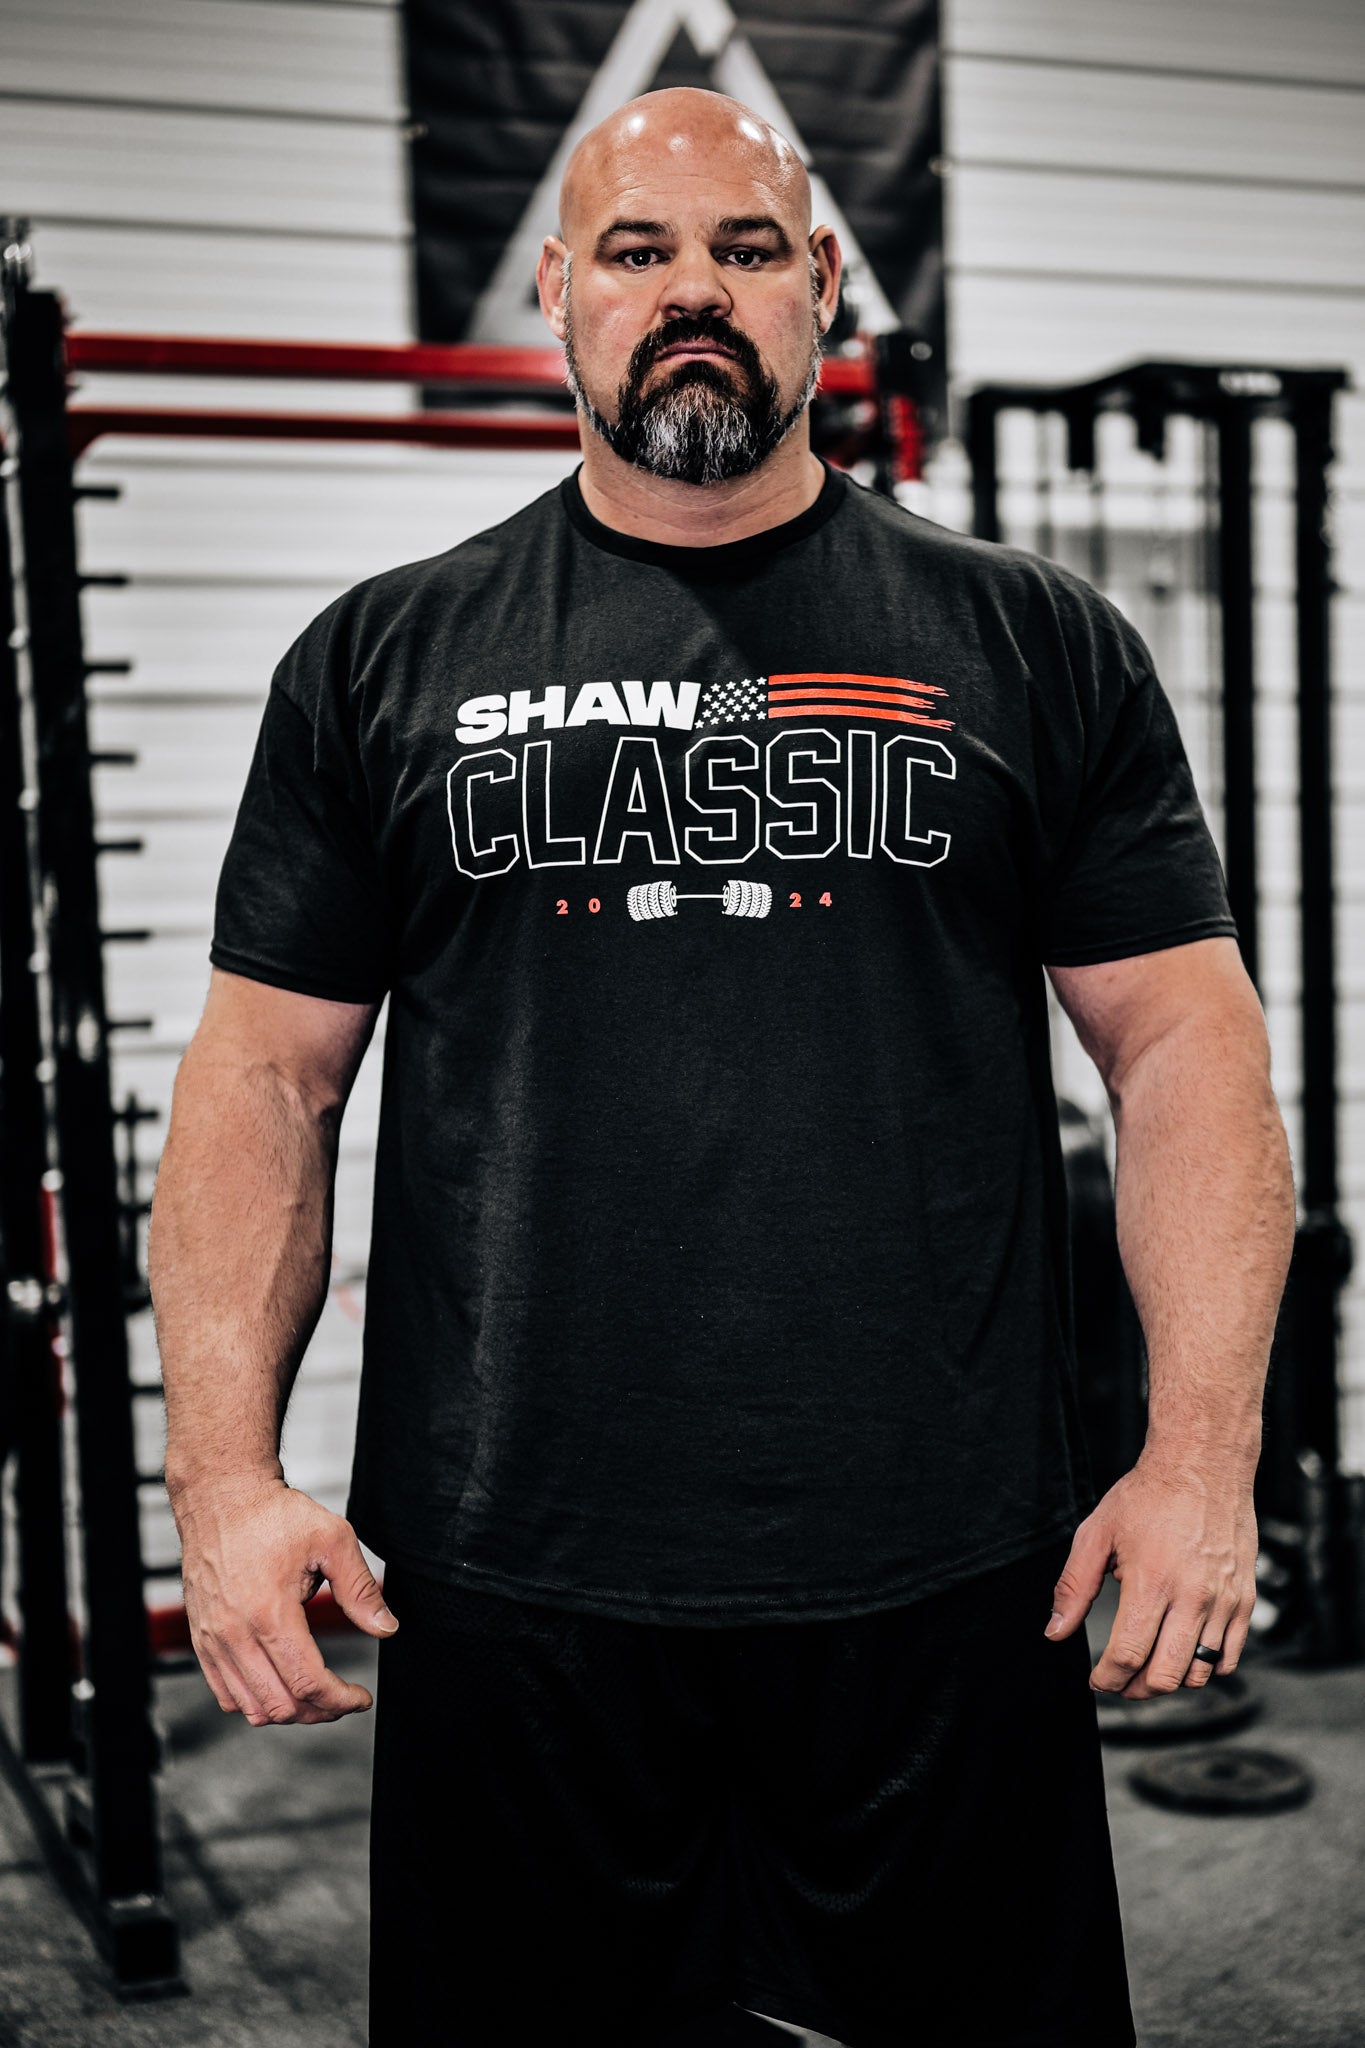 Shaw Classic Items